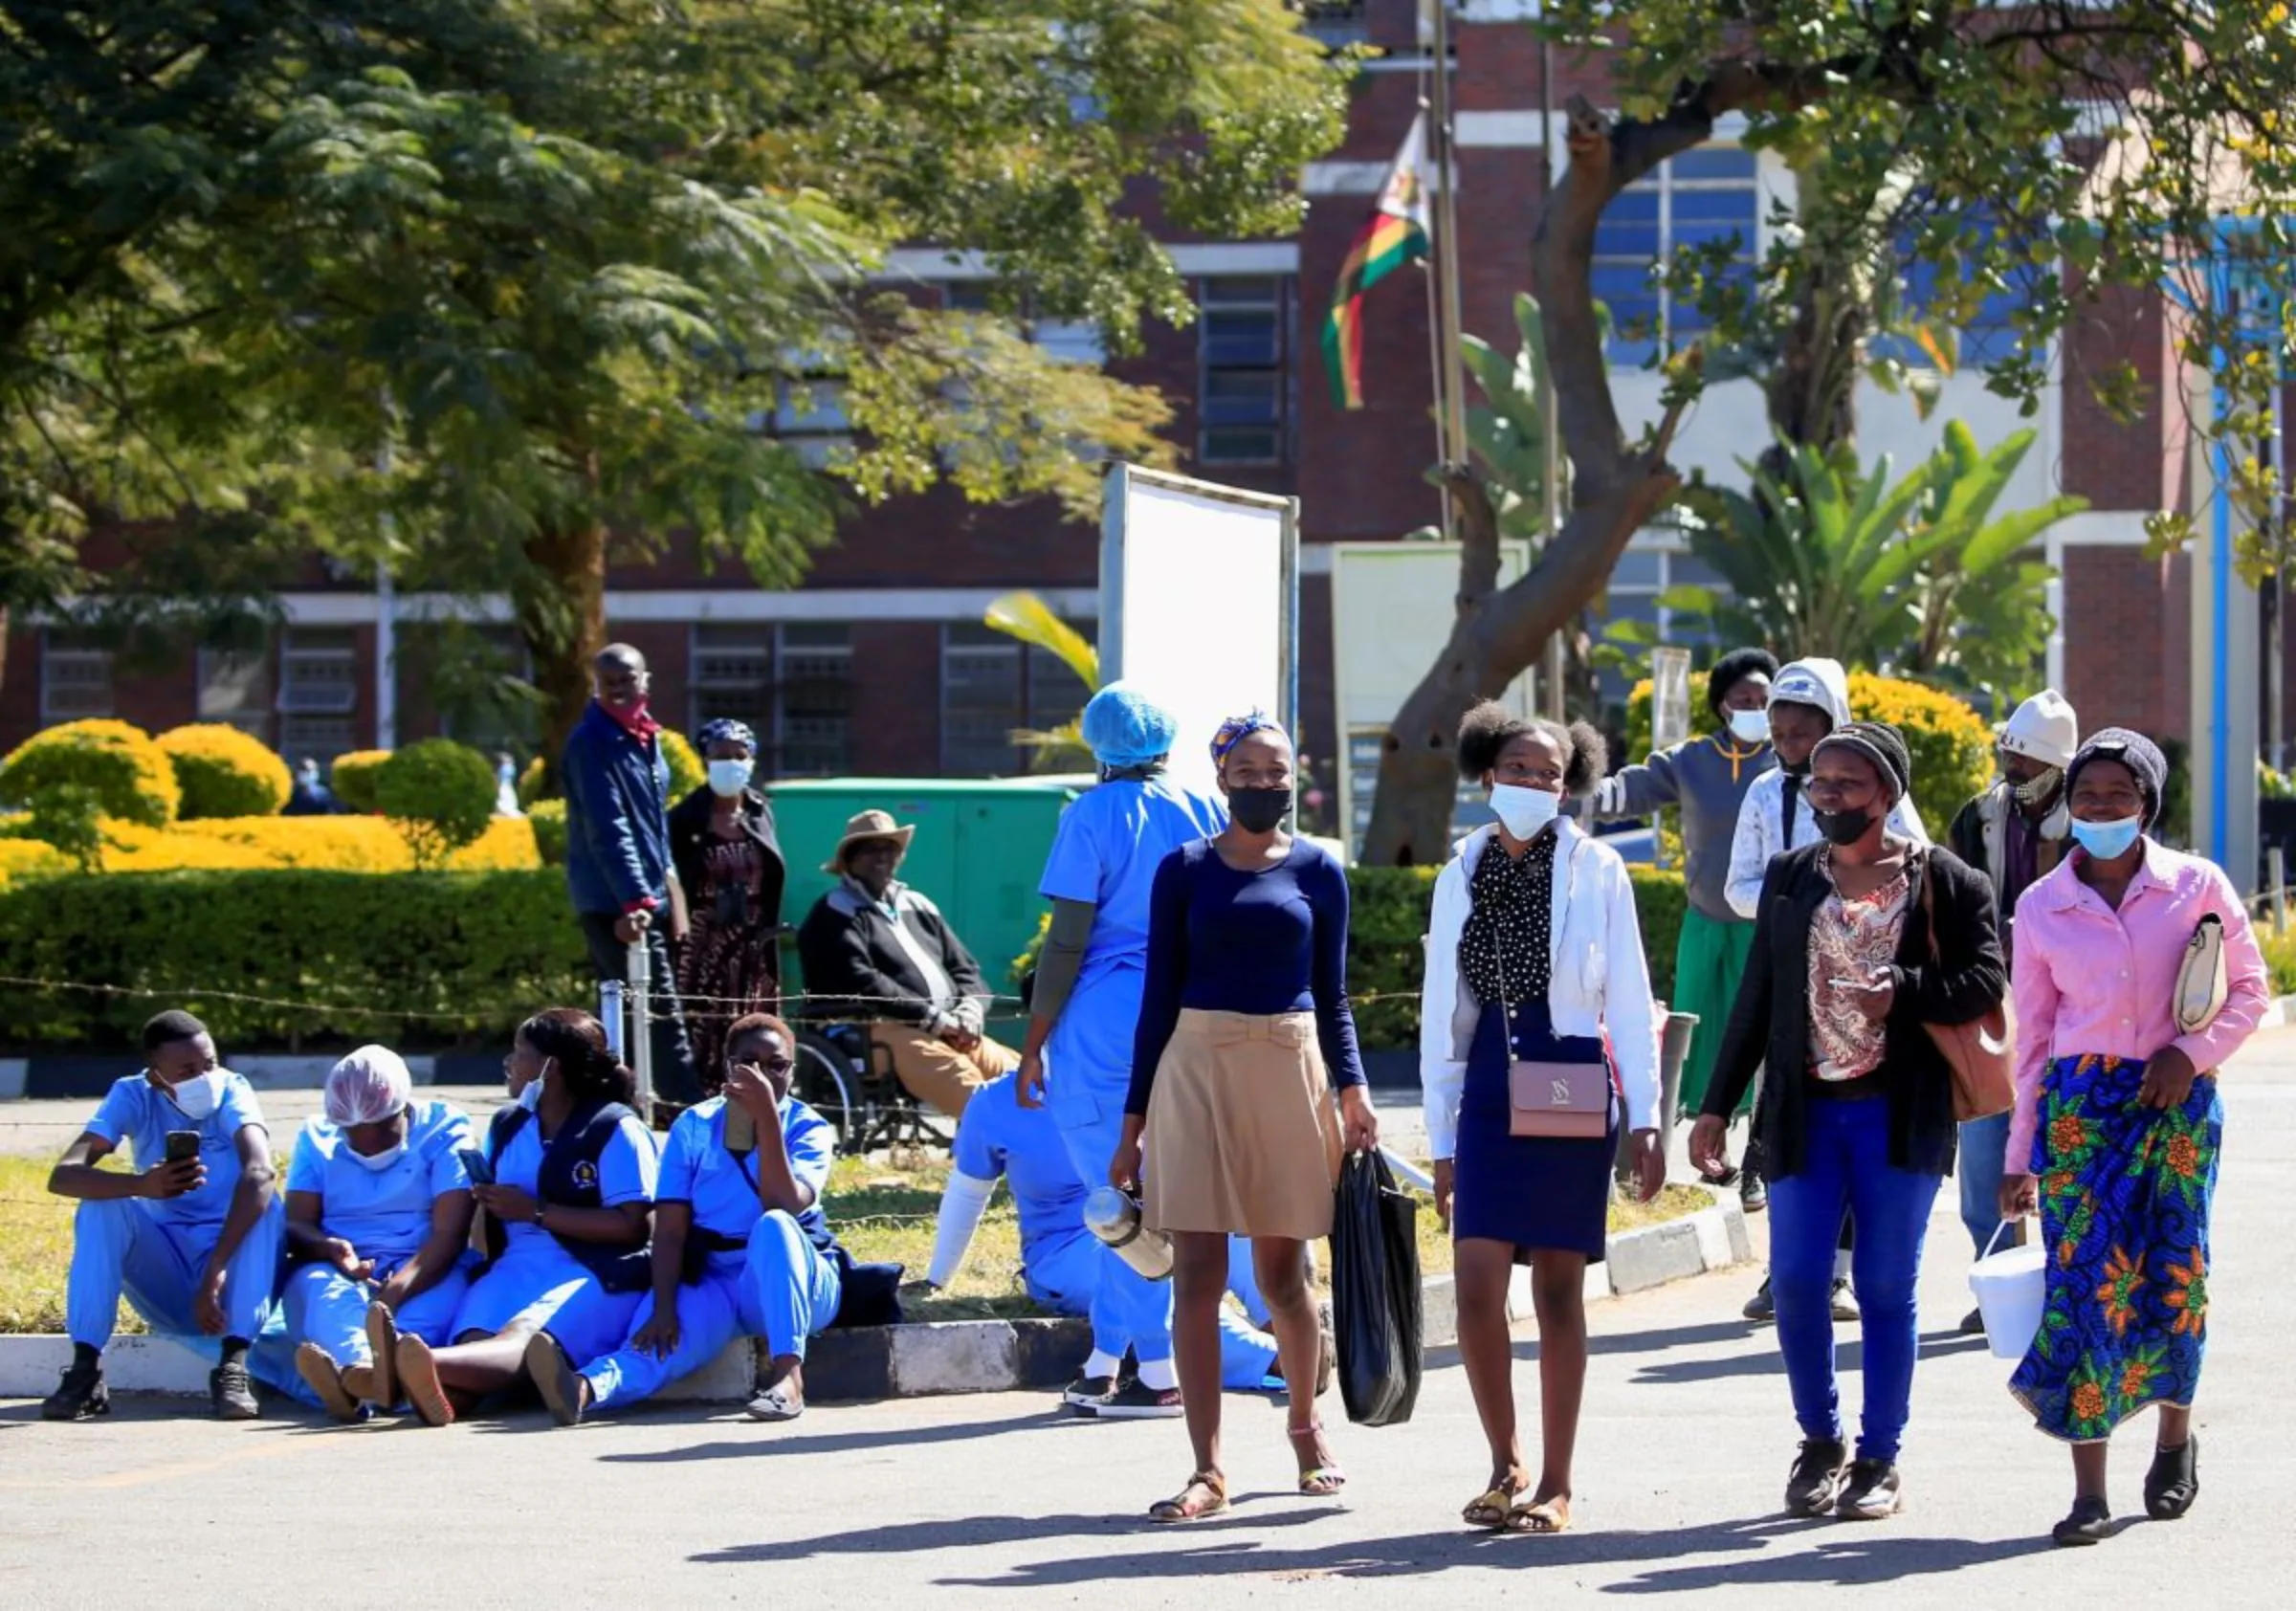 Poeple walk past Zimbabwean medical workers as they sit outside Sally Mugabe Hospital during a strike by state doctors and nurses to press for higher pay, in Harare, Zimbabwe, June 20, 2022. REUTERS/Philimon Bulawayo